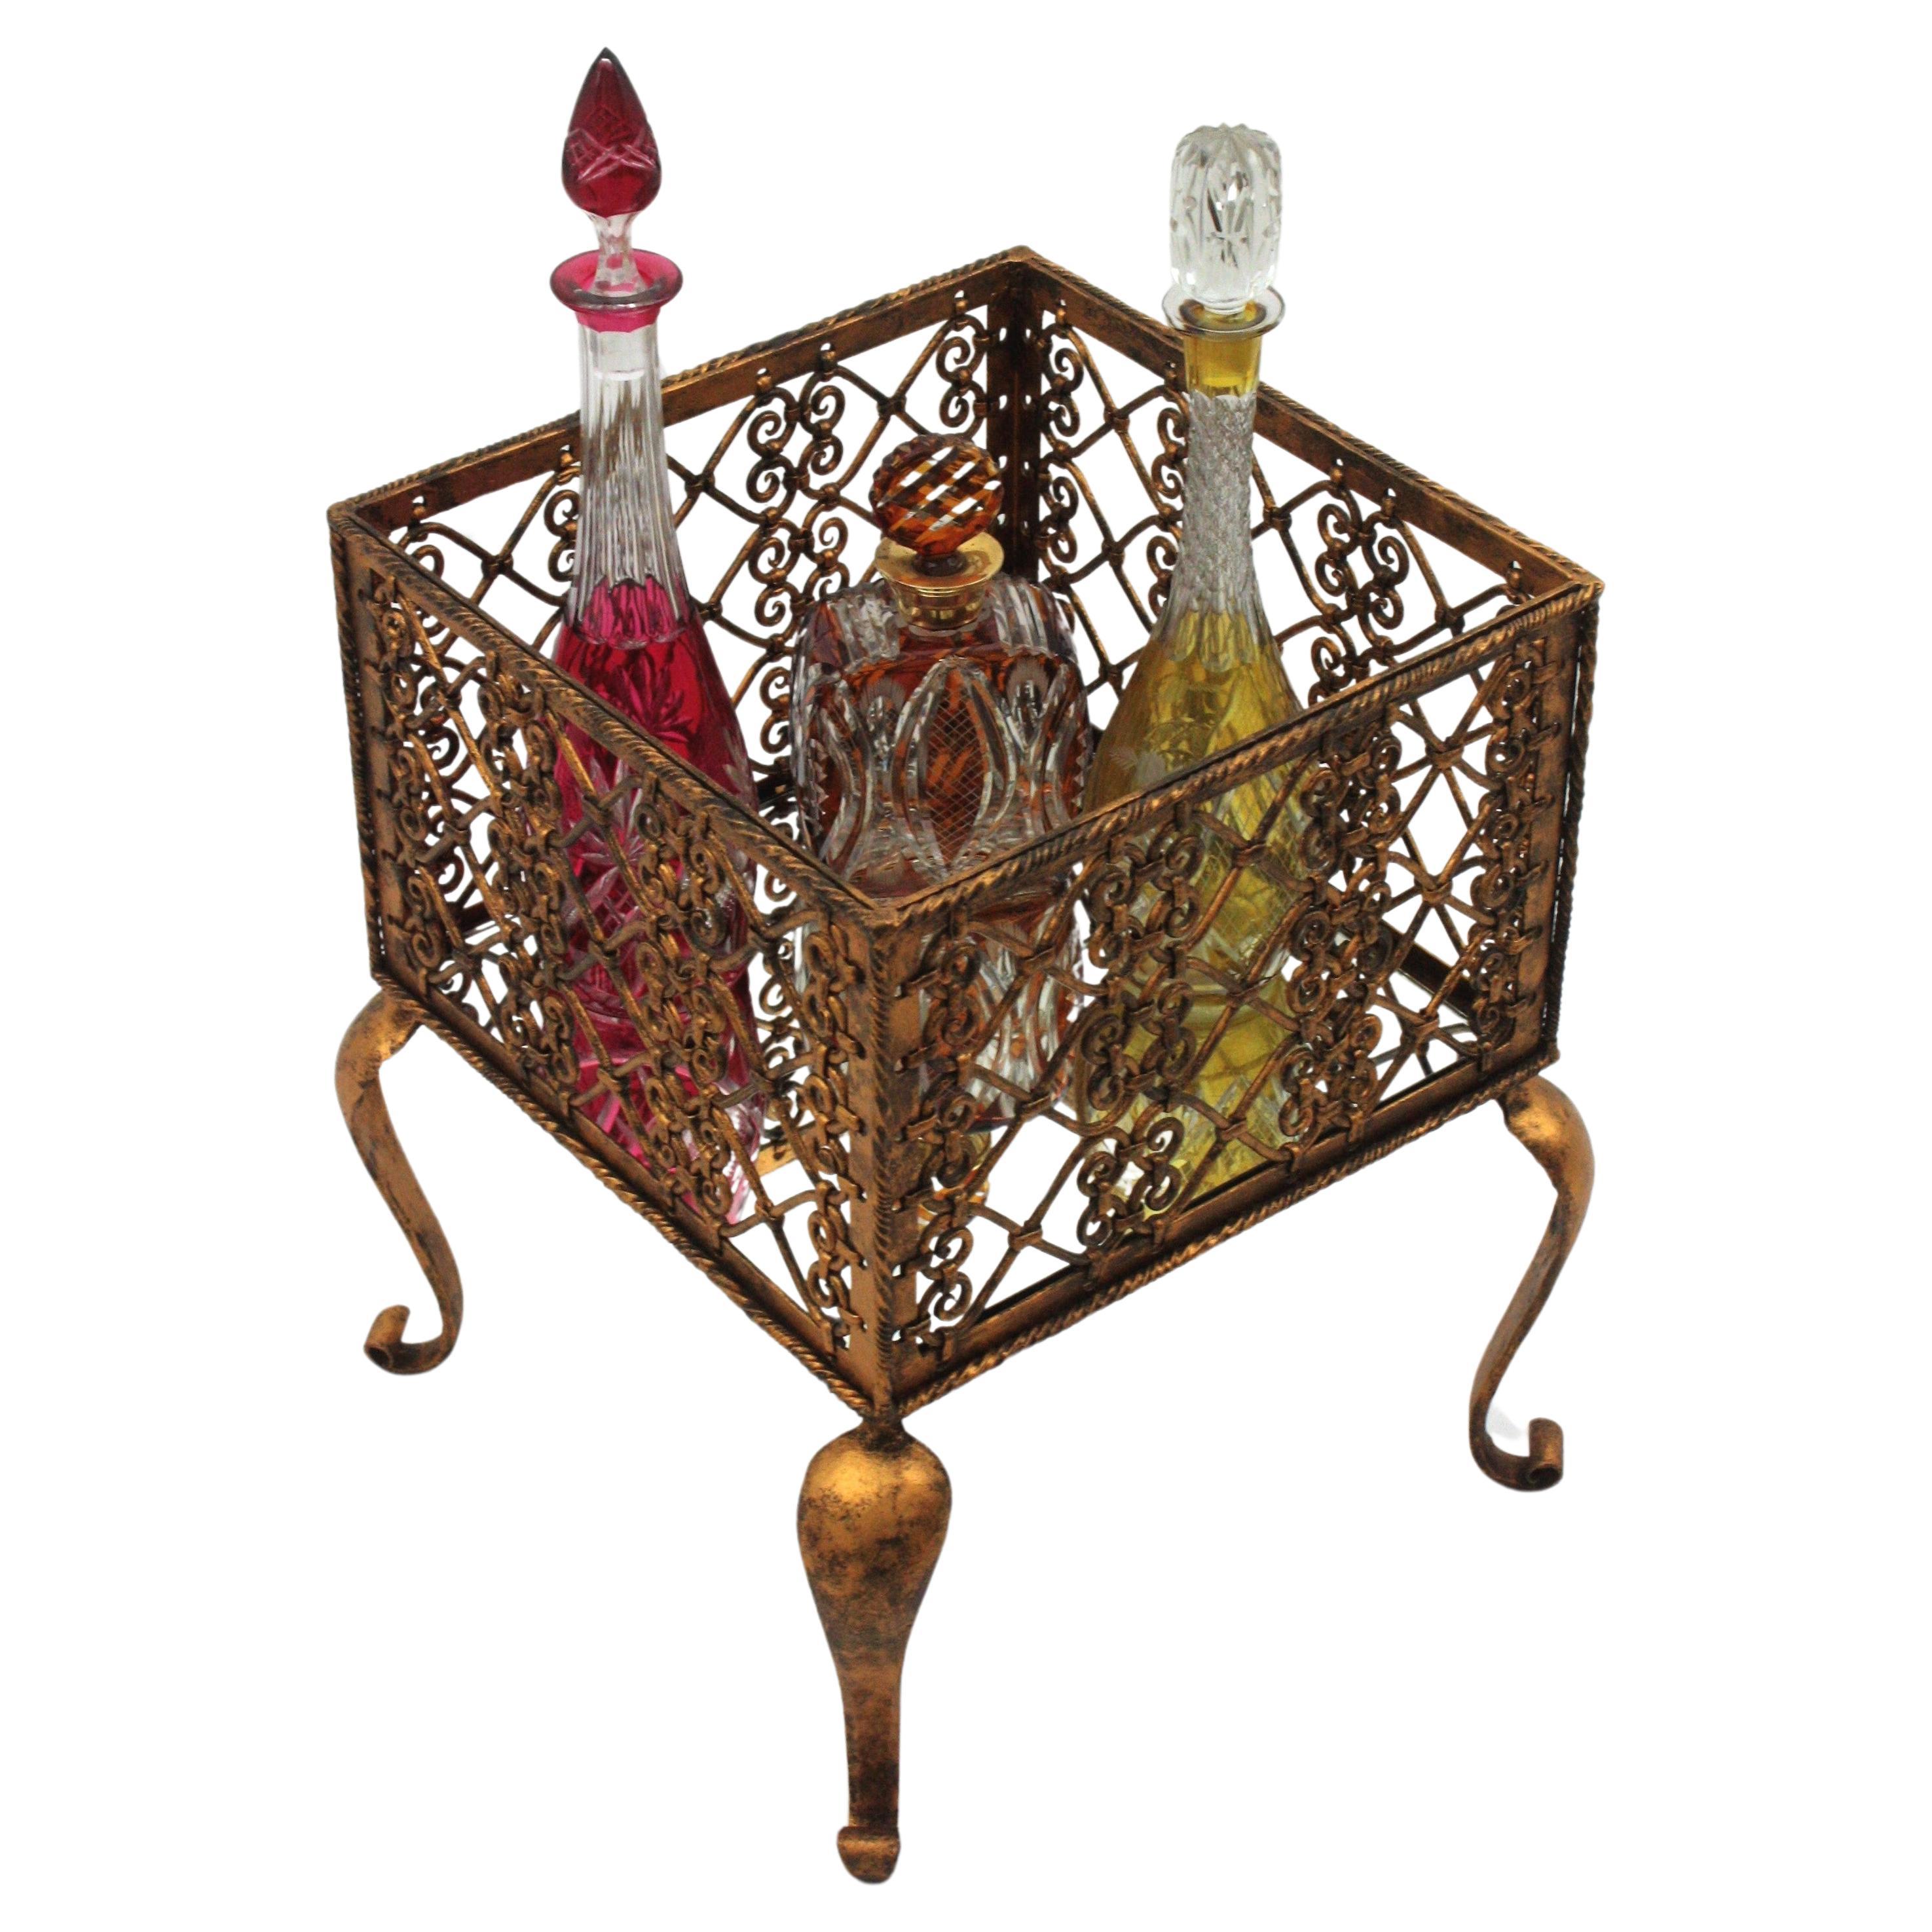 Scrollwork Wrought iron lattice drinks stand / Side Table / Planter, France, 1930s
This stylish squared gilt iron jardinière / stand has filigree scroll lattice panels and cabriole legs
The side panels are richly decorated by iron scroll lattice